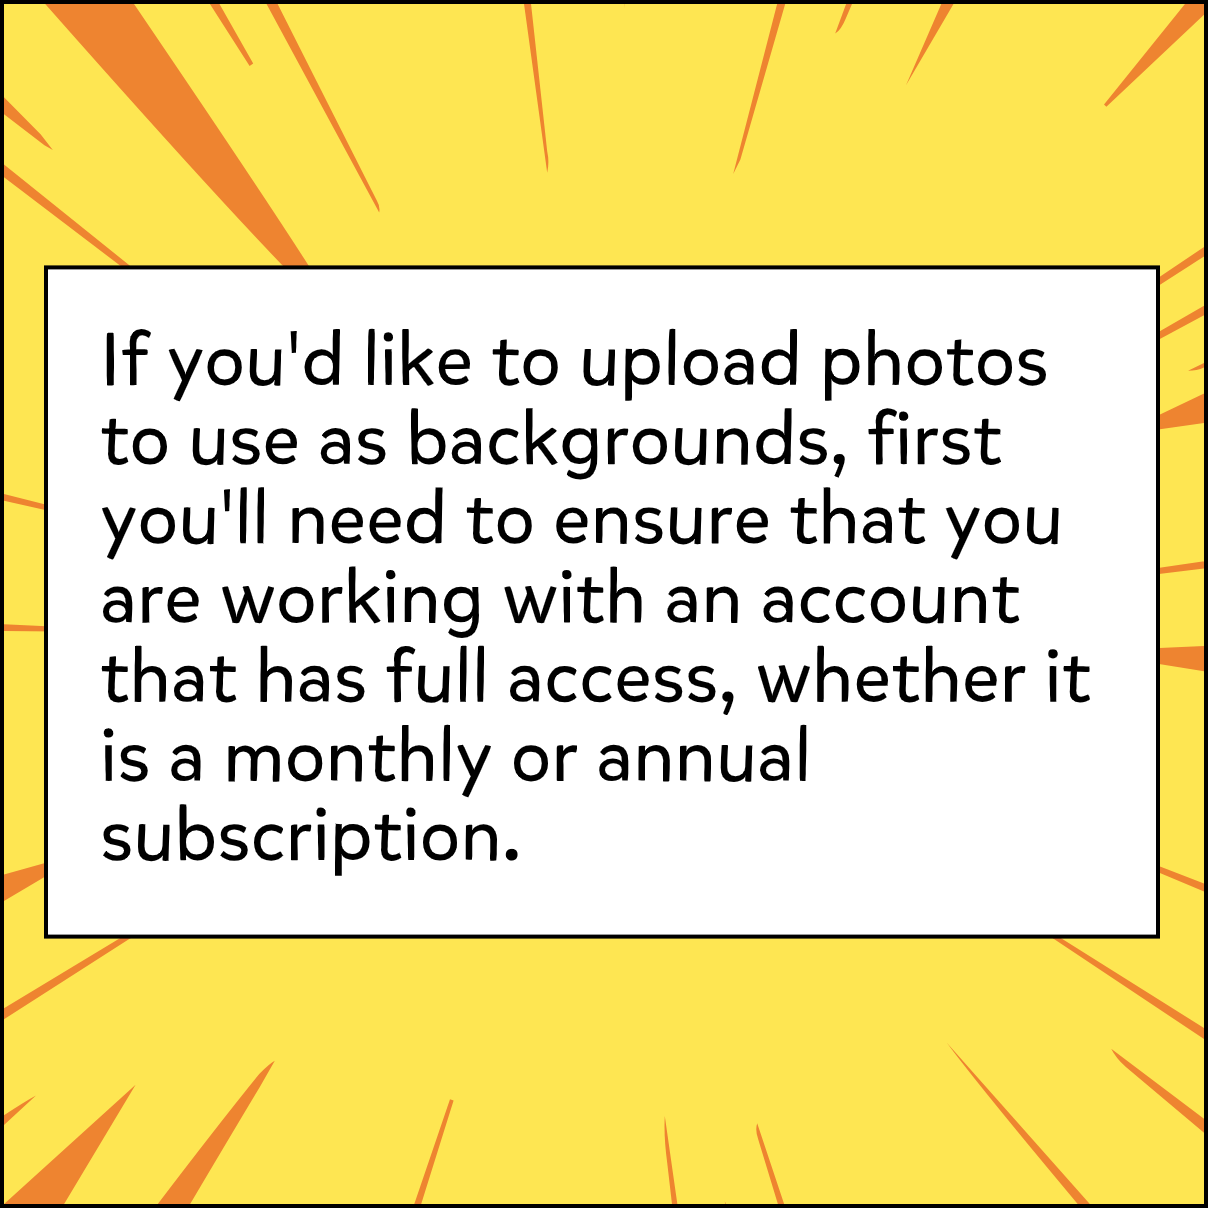 If you'd like to upload photos to use as backgrounds, first you'll need to ensure that you are working with an account that has full access, whether it is a monthly or annual subscription.